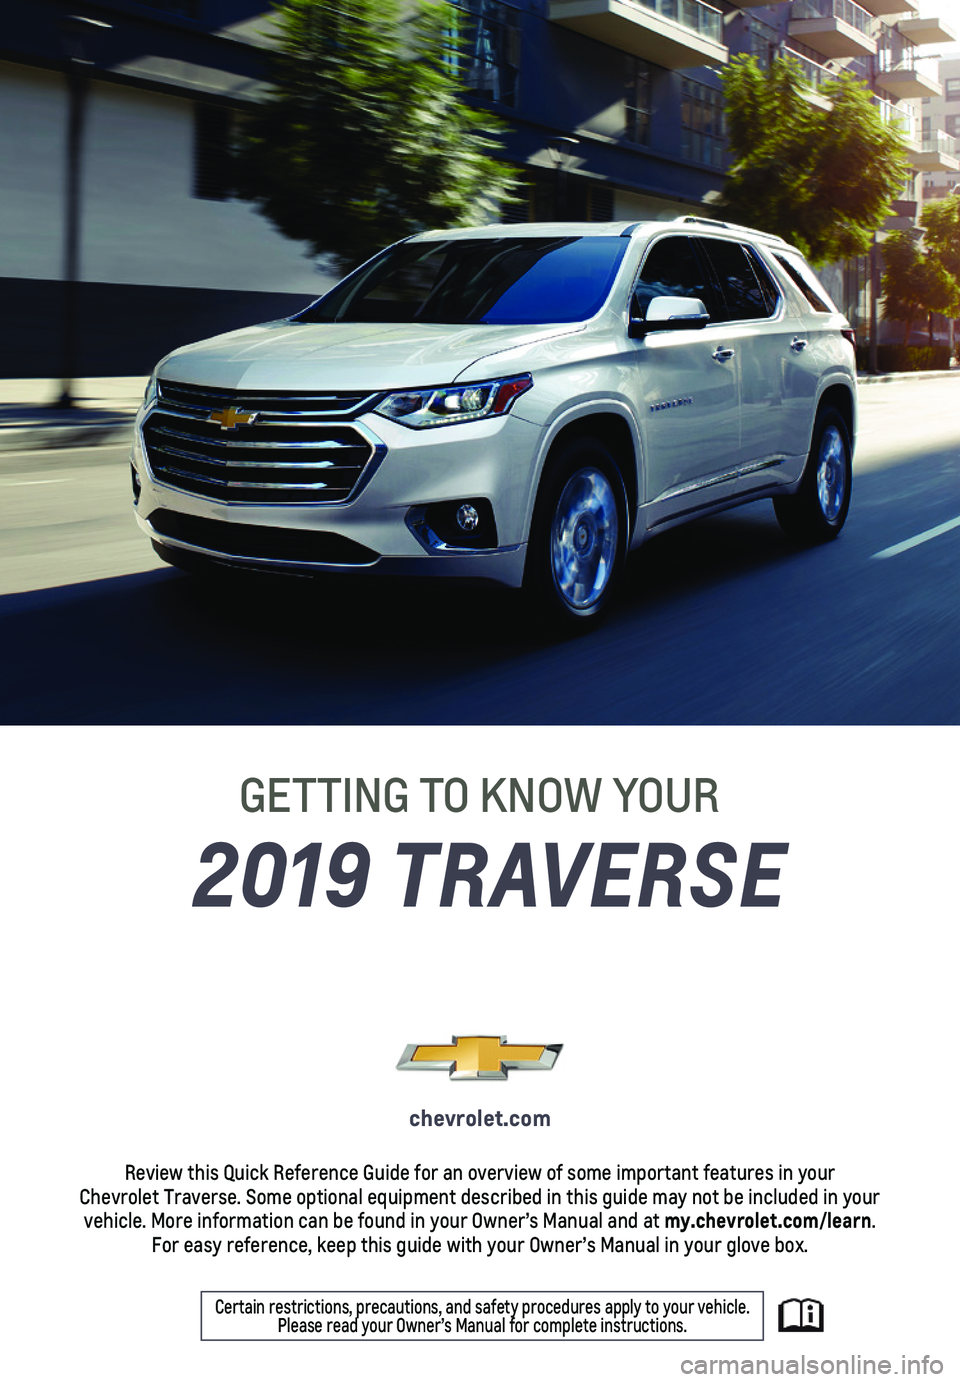 CHEVROLET TRAX 2019  Owners Manual 1
2019 TRAVERSE
GETTING TO KNOW YOUR
chevrolet.com
Review this Quick Reference Guide for an overview of some important feat\
ures in your  Chevrolet Traverse. Some optional equipment described in this